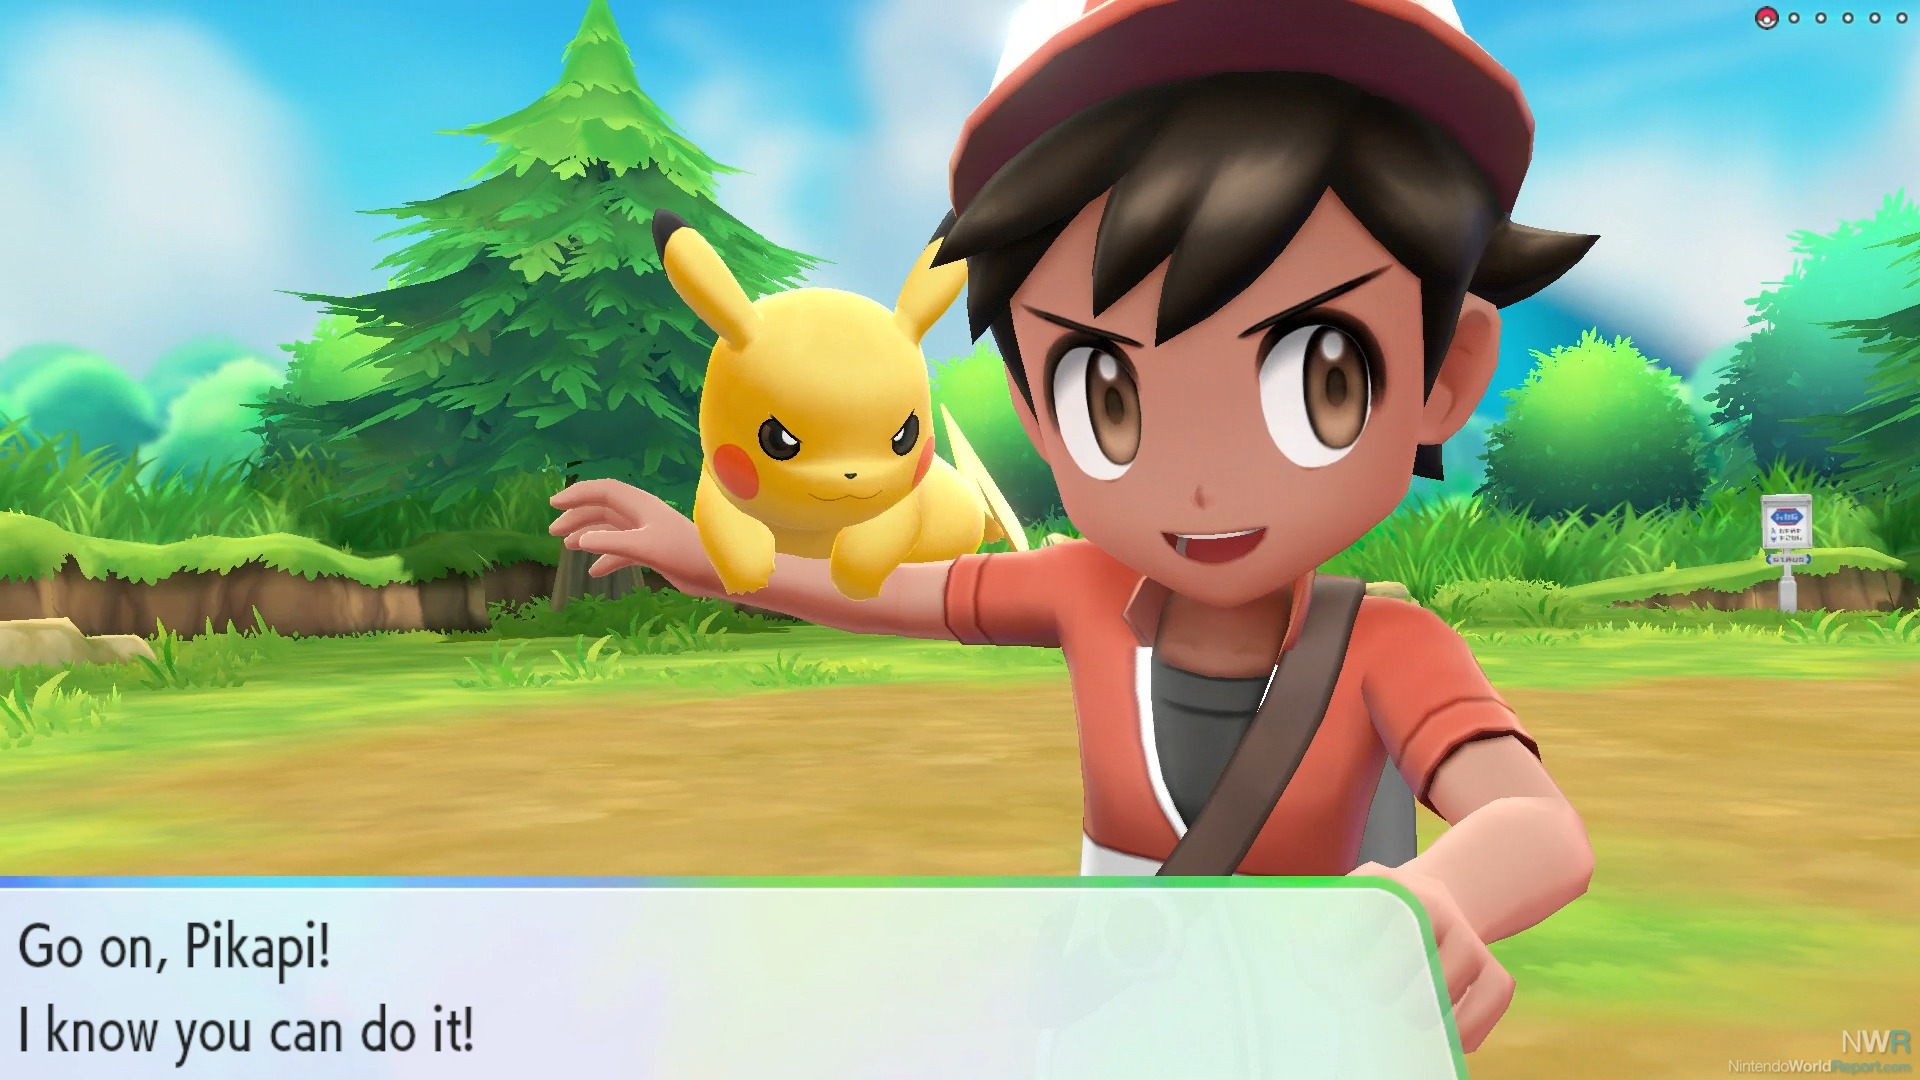 Pokémon - - Pikachu! Nintendo Eevee! Report Review Review Let\'s World Go, and